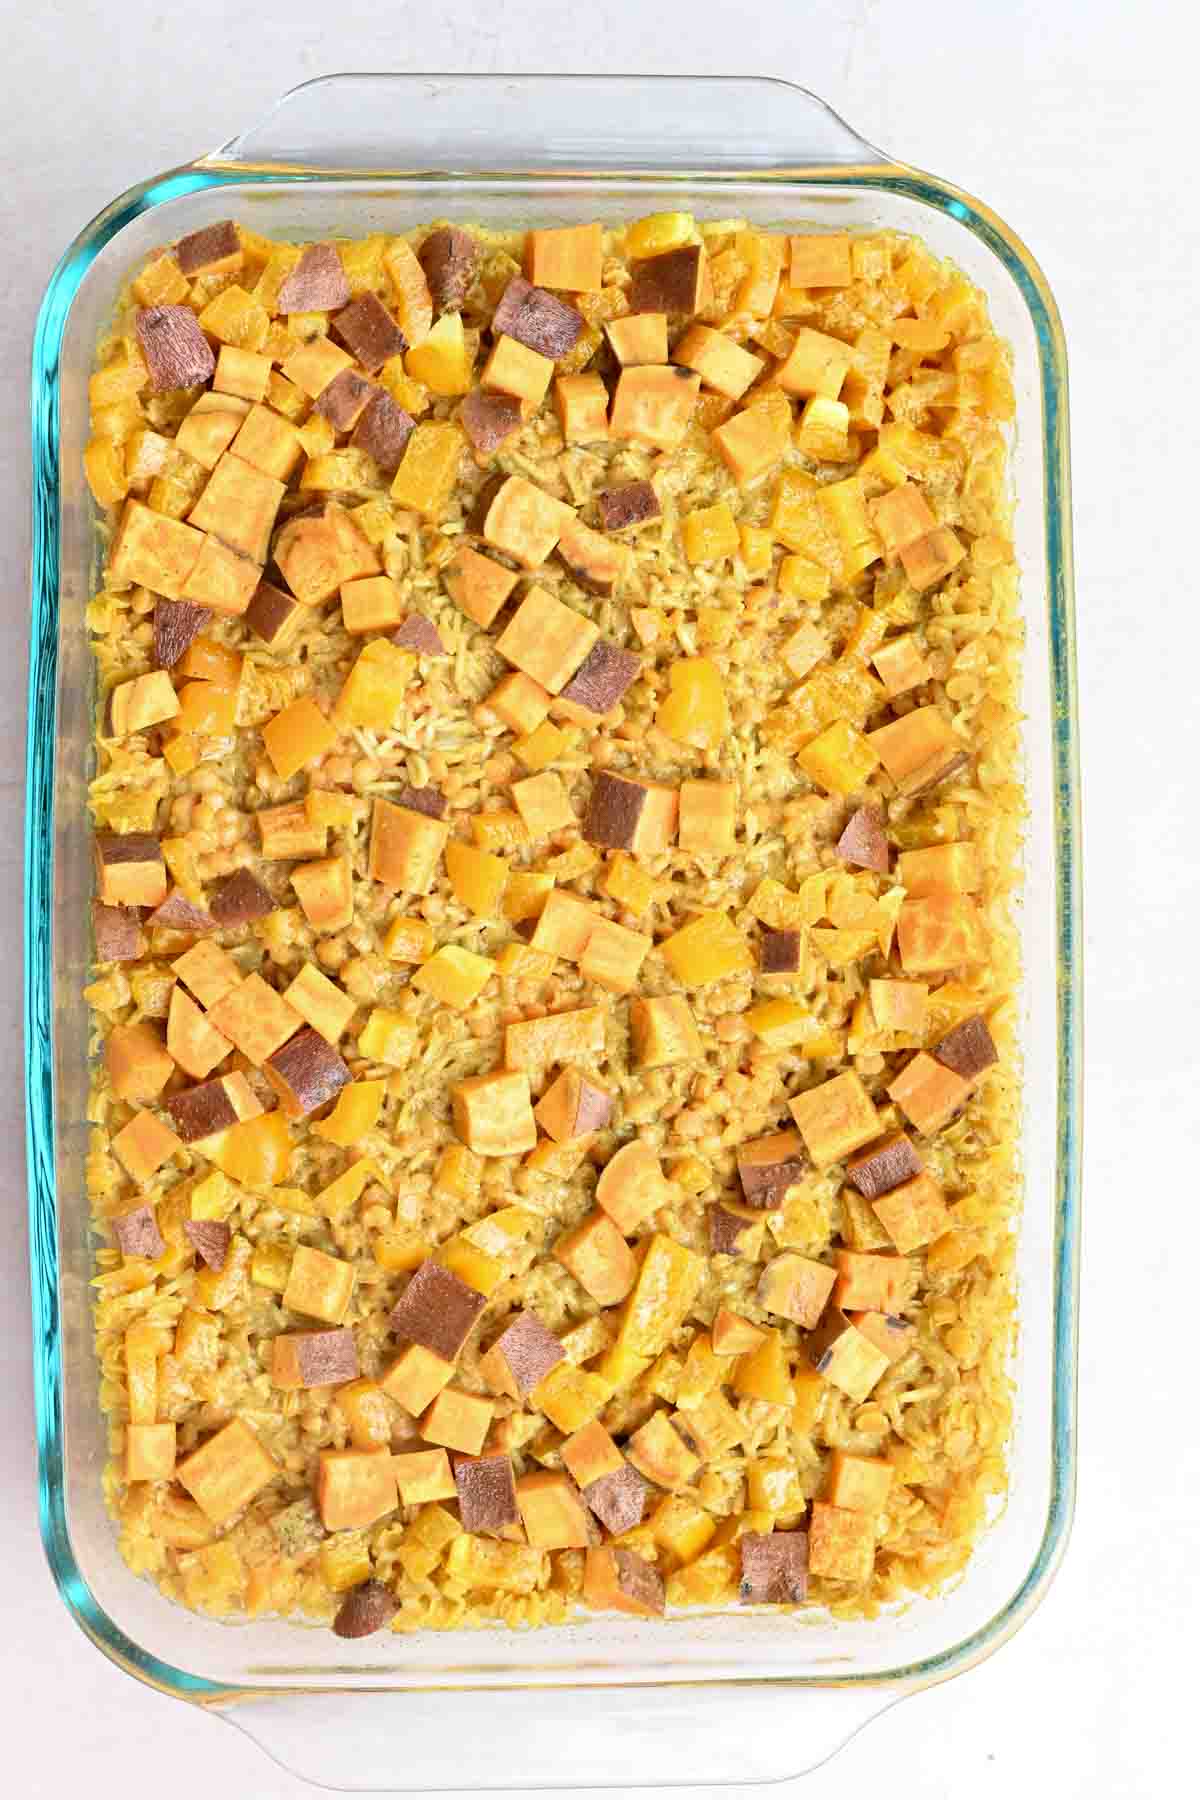 Glass casserole dish filled with cooked lentil, rice, and sweet potato casserole.